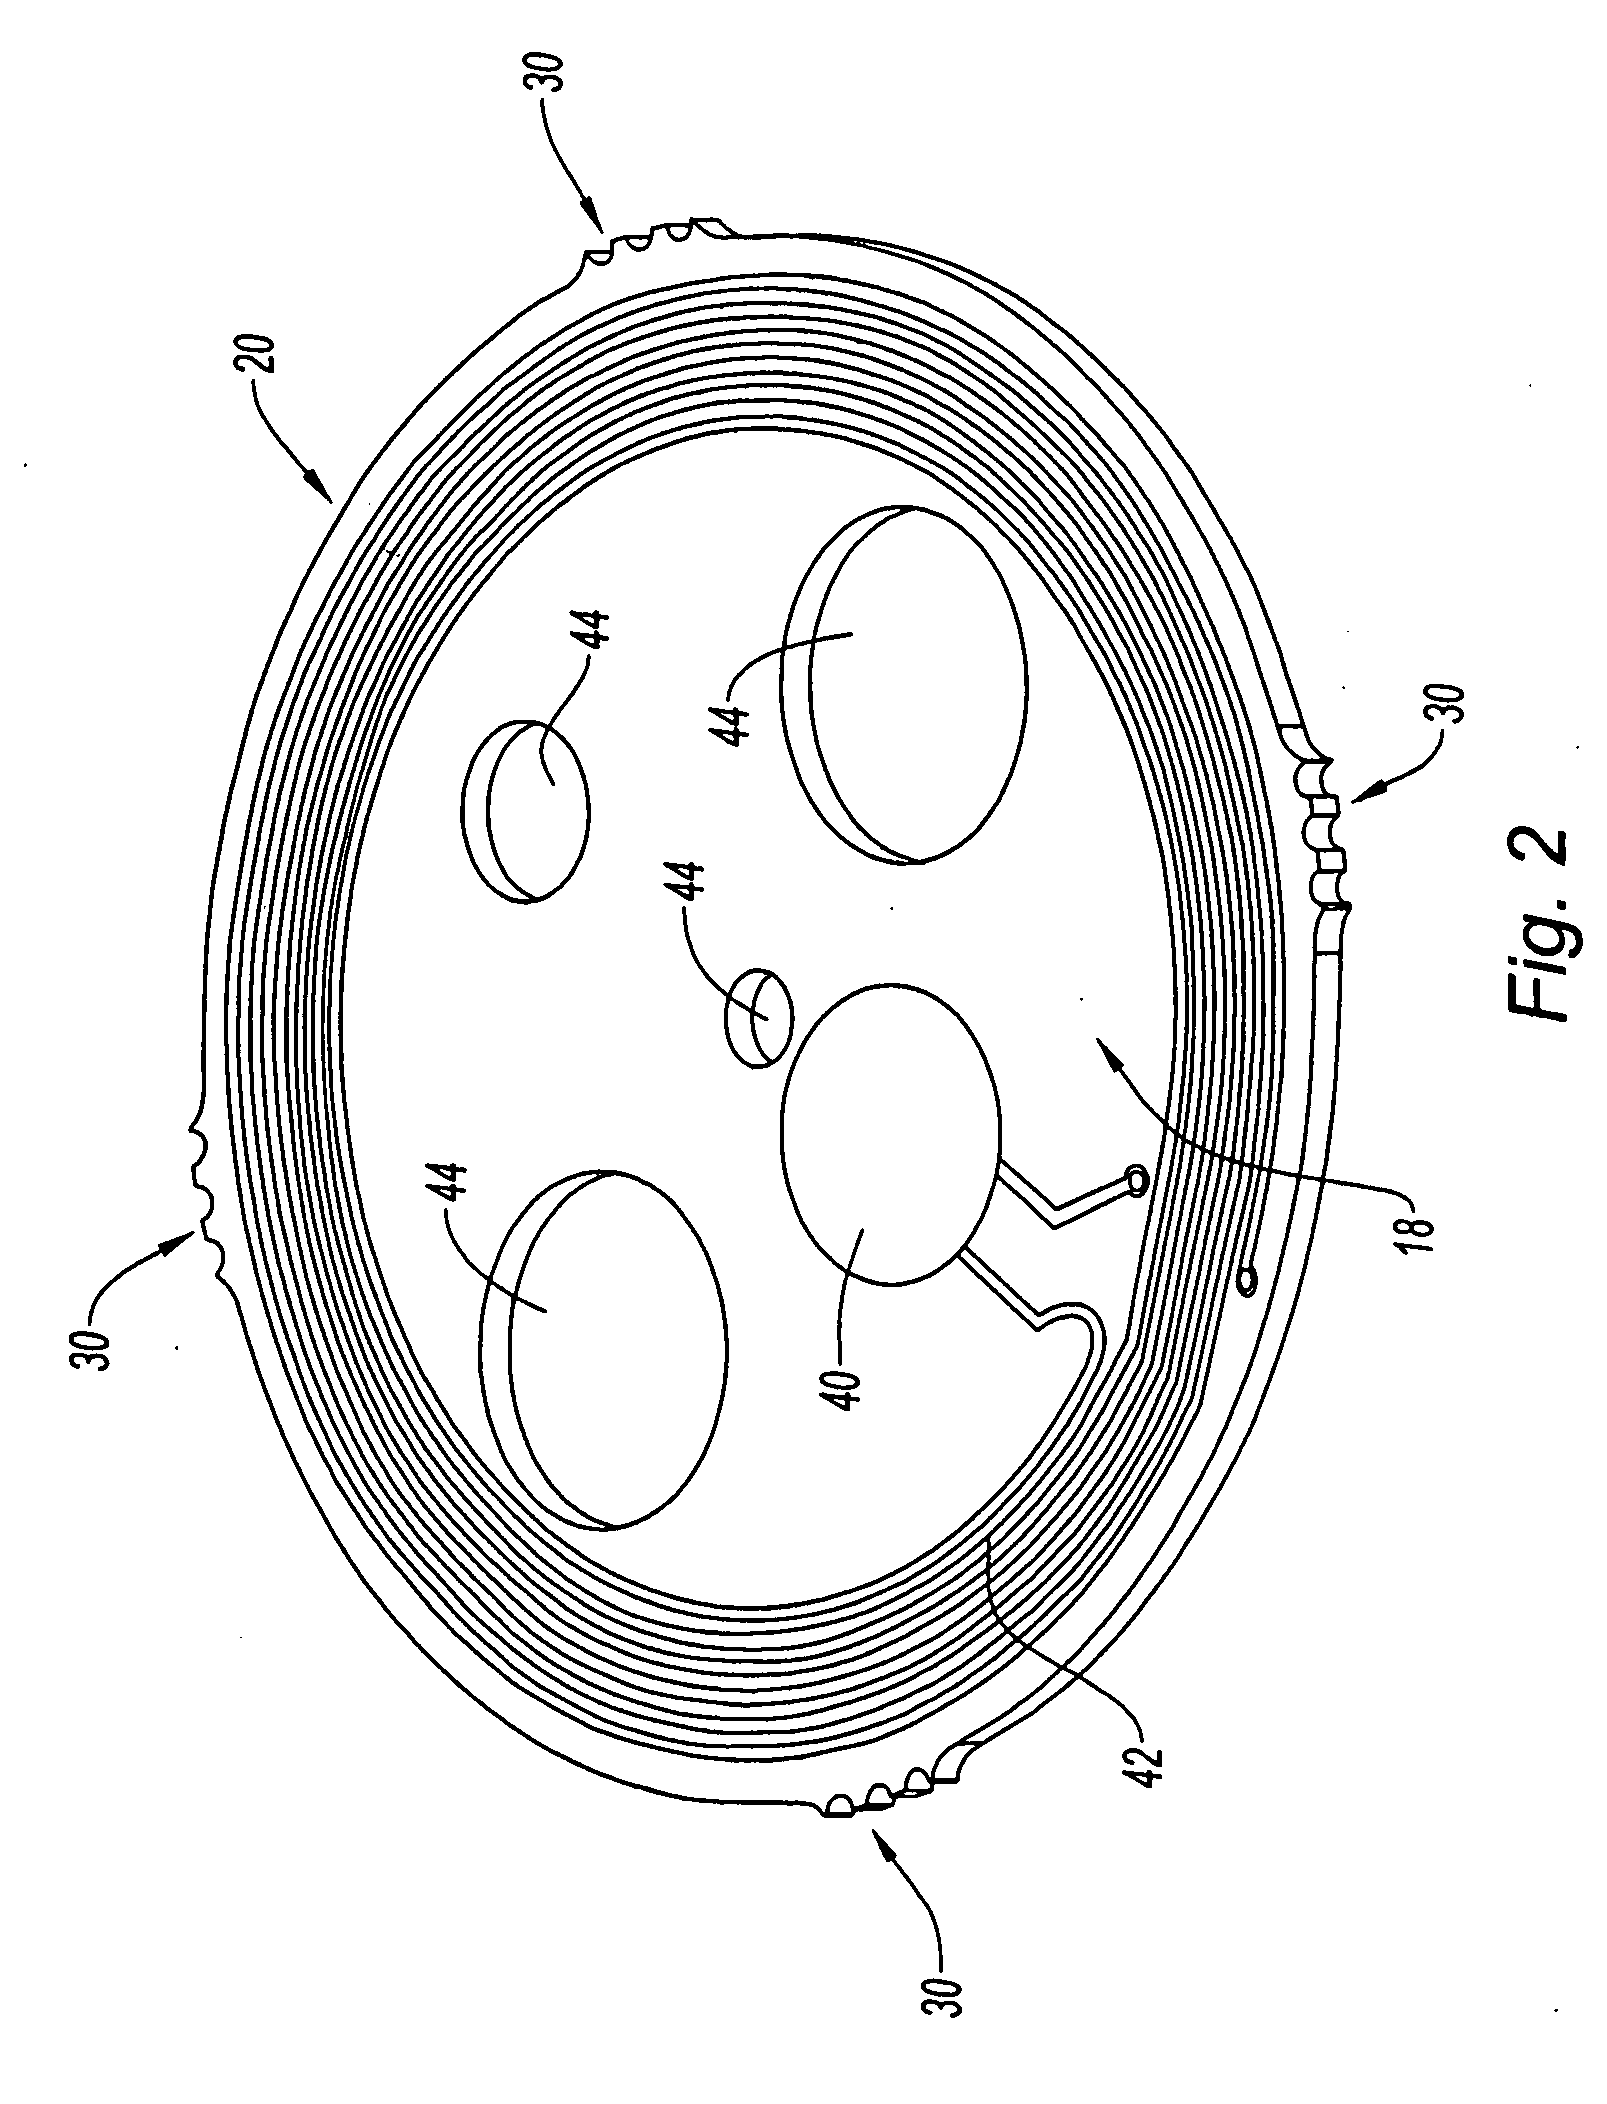 Token With Electronic Device, Method of Making Thereof, and Apparatus for Making Thereof